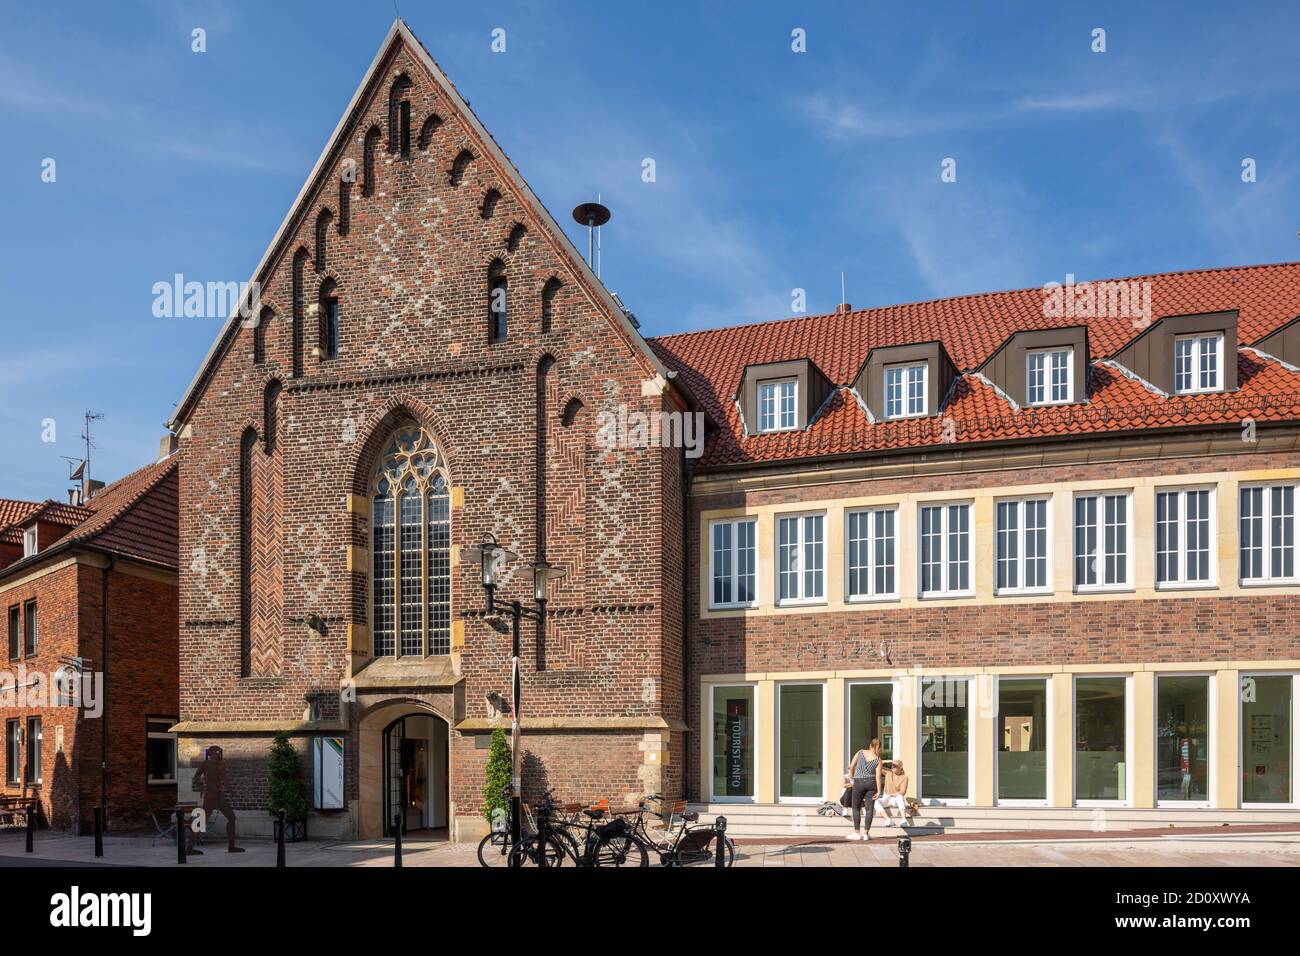 D-Borken, Hohe Mark Westmuensterland Nature Park, Muensterland, Westphalia, North Rhine-Westphalia, NRW, former Church of the Holy Spirit, nowadays council hall and local museum, brick building, brick Gothic Stock Photo